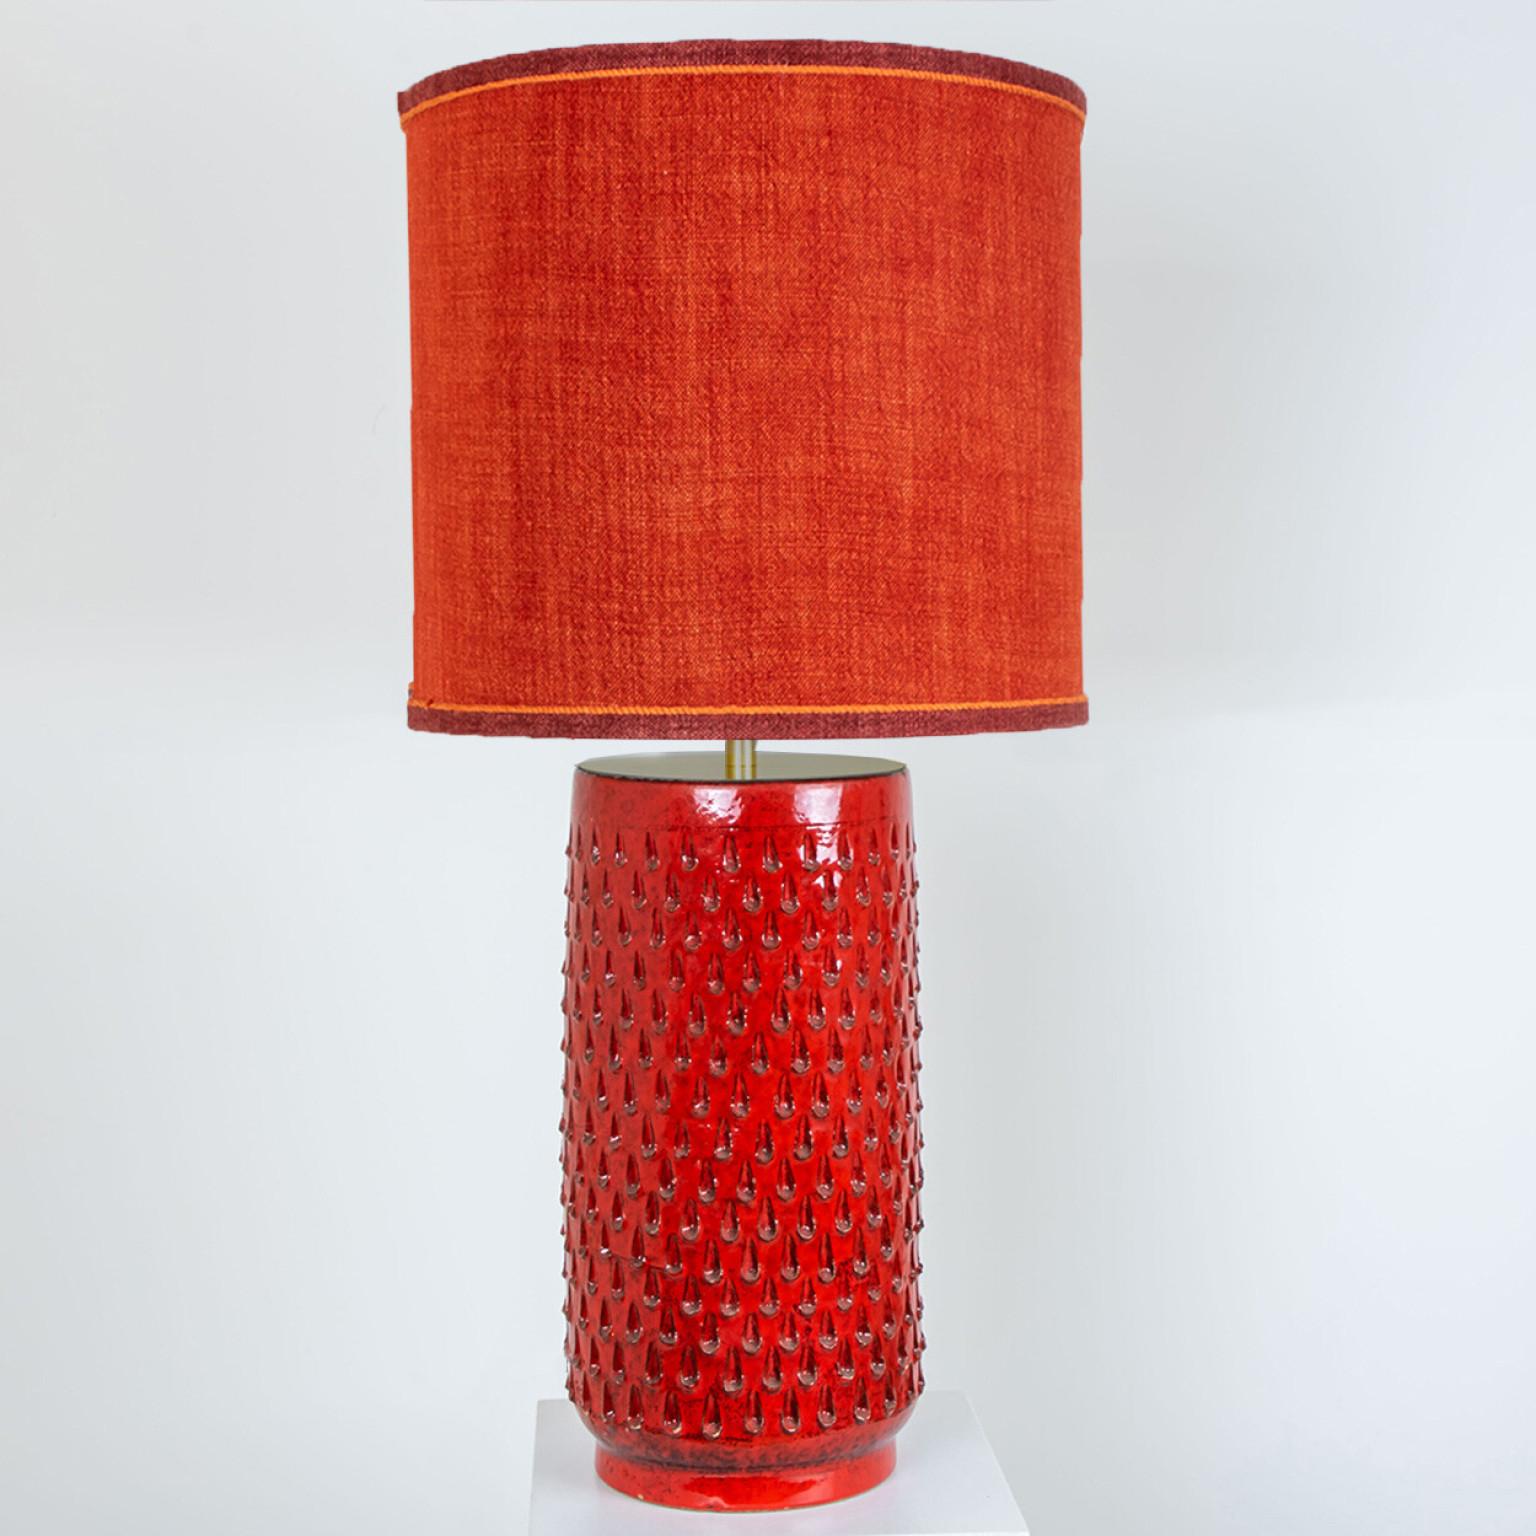 Fratelli Fanciullacci Ceramic Table Lamp with New Custom Made Lampshade, 1970 For Sale 9